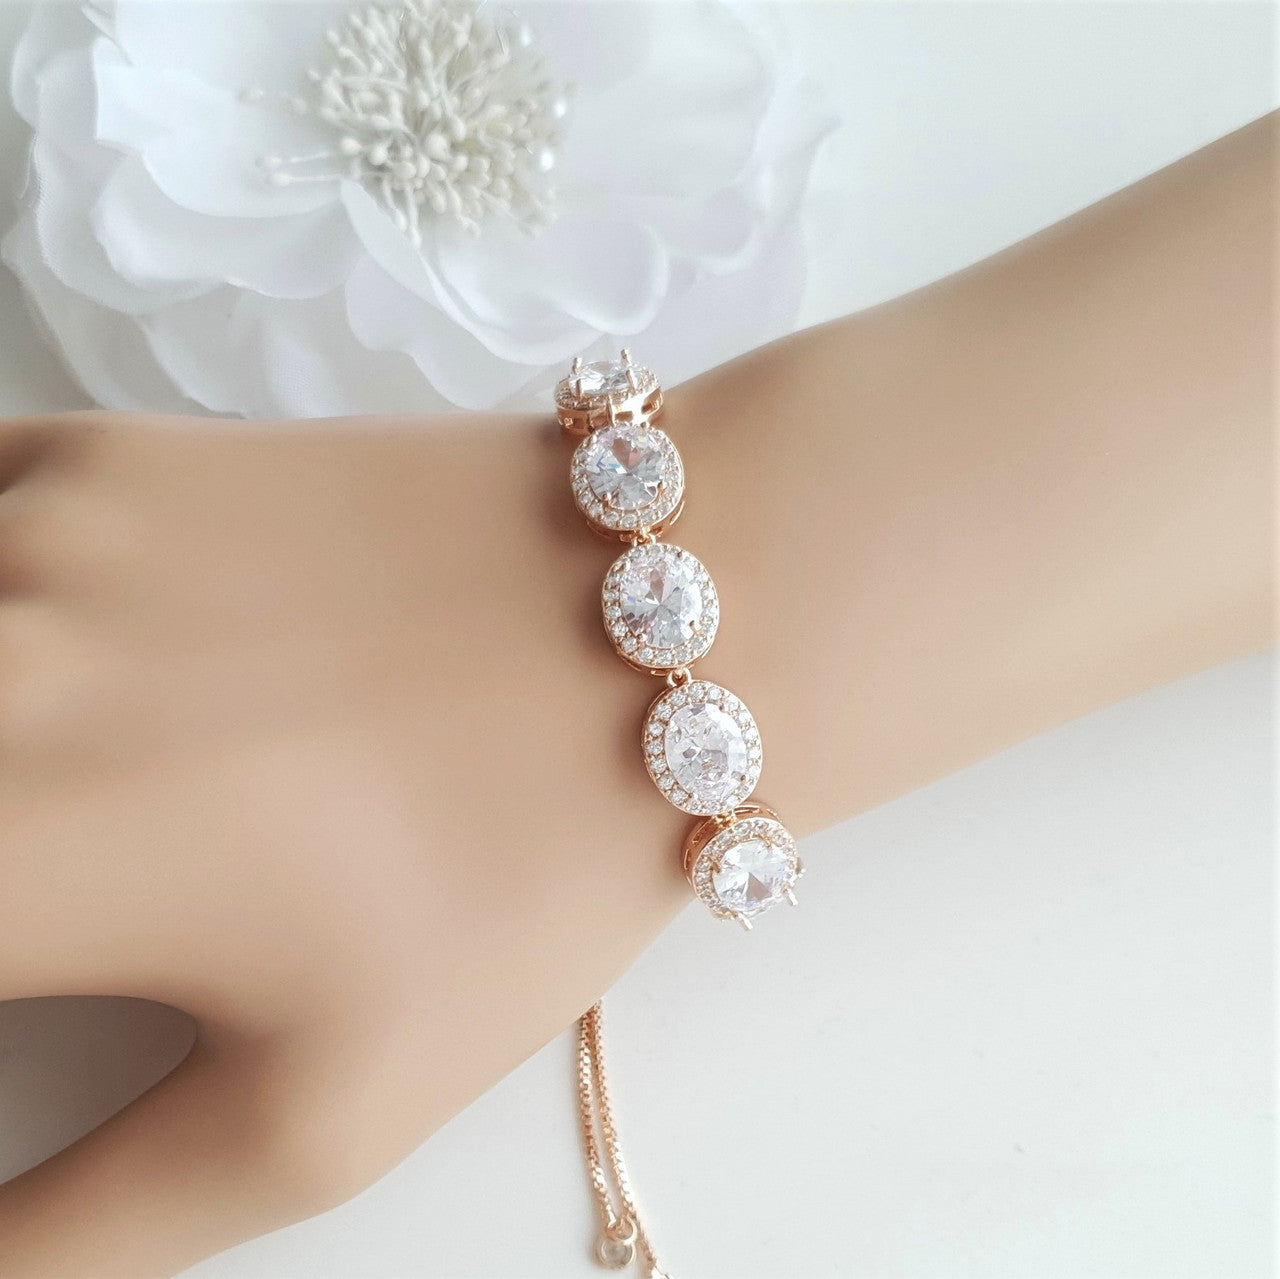 Silver and Crystal Bracelet for Weddings- Emily